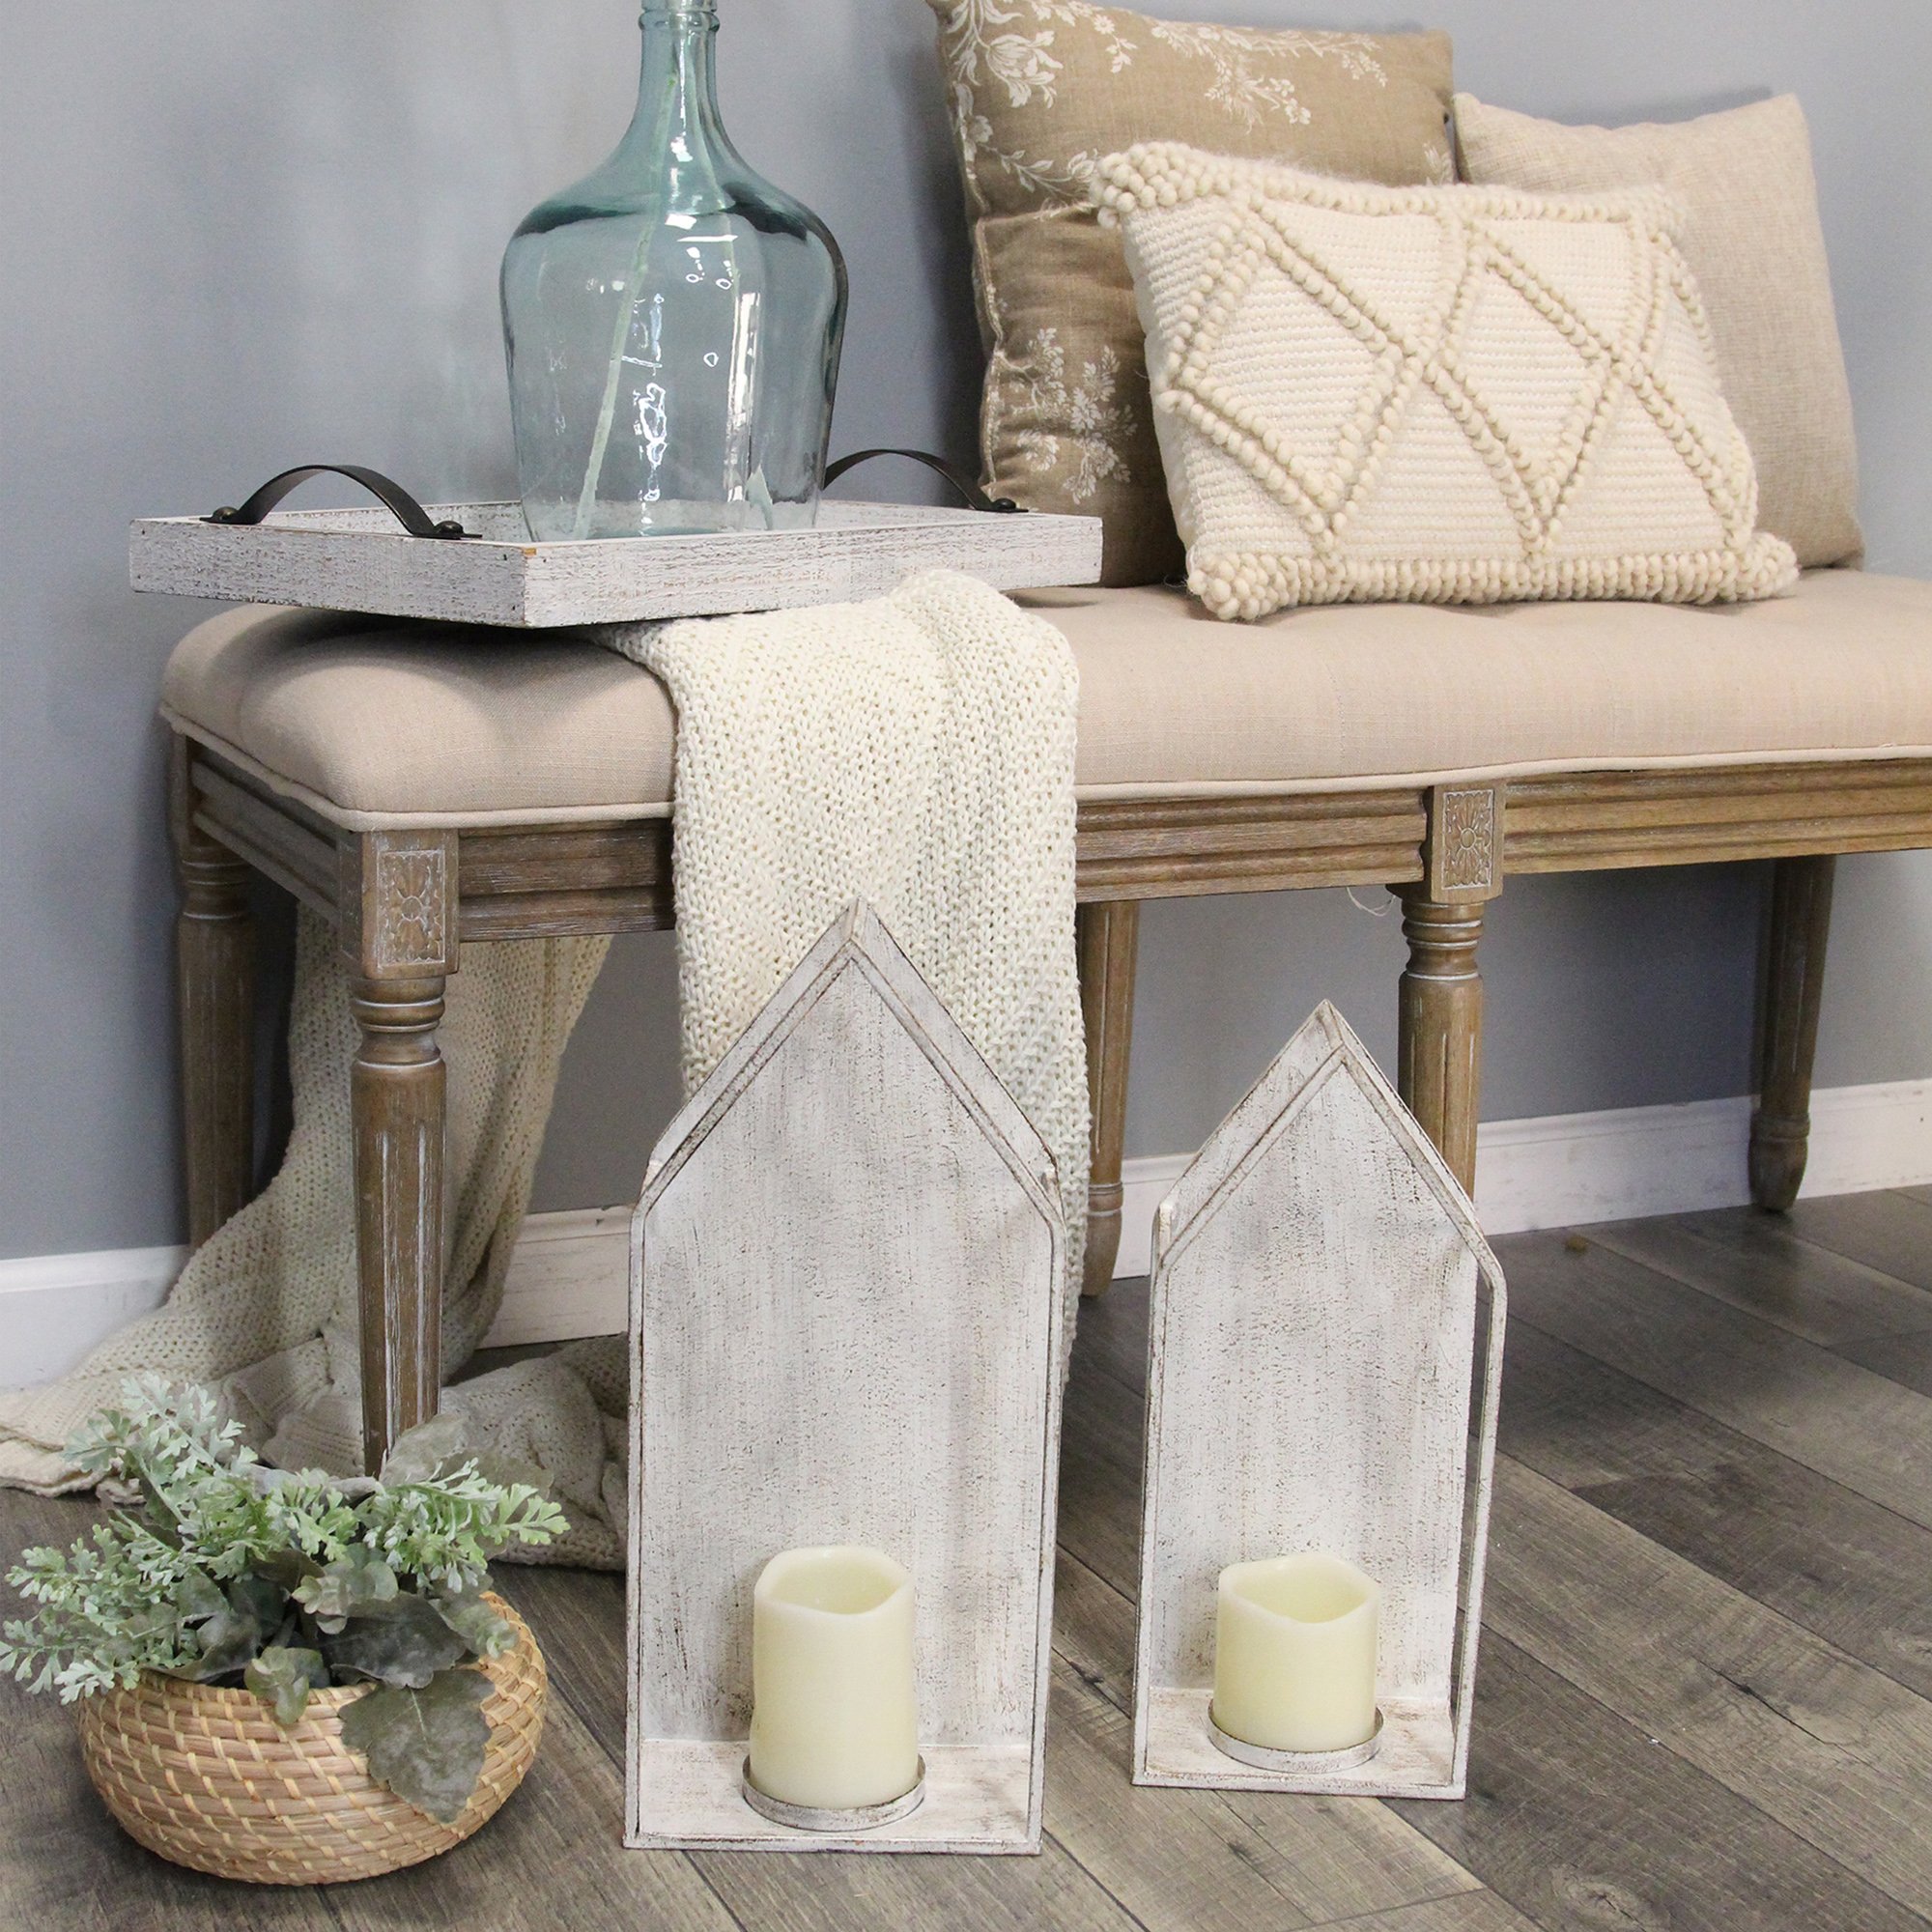 S/2 Farmhouse Style Distressed Metal Candleholders